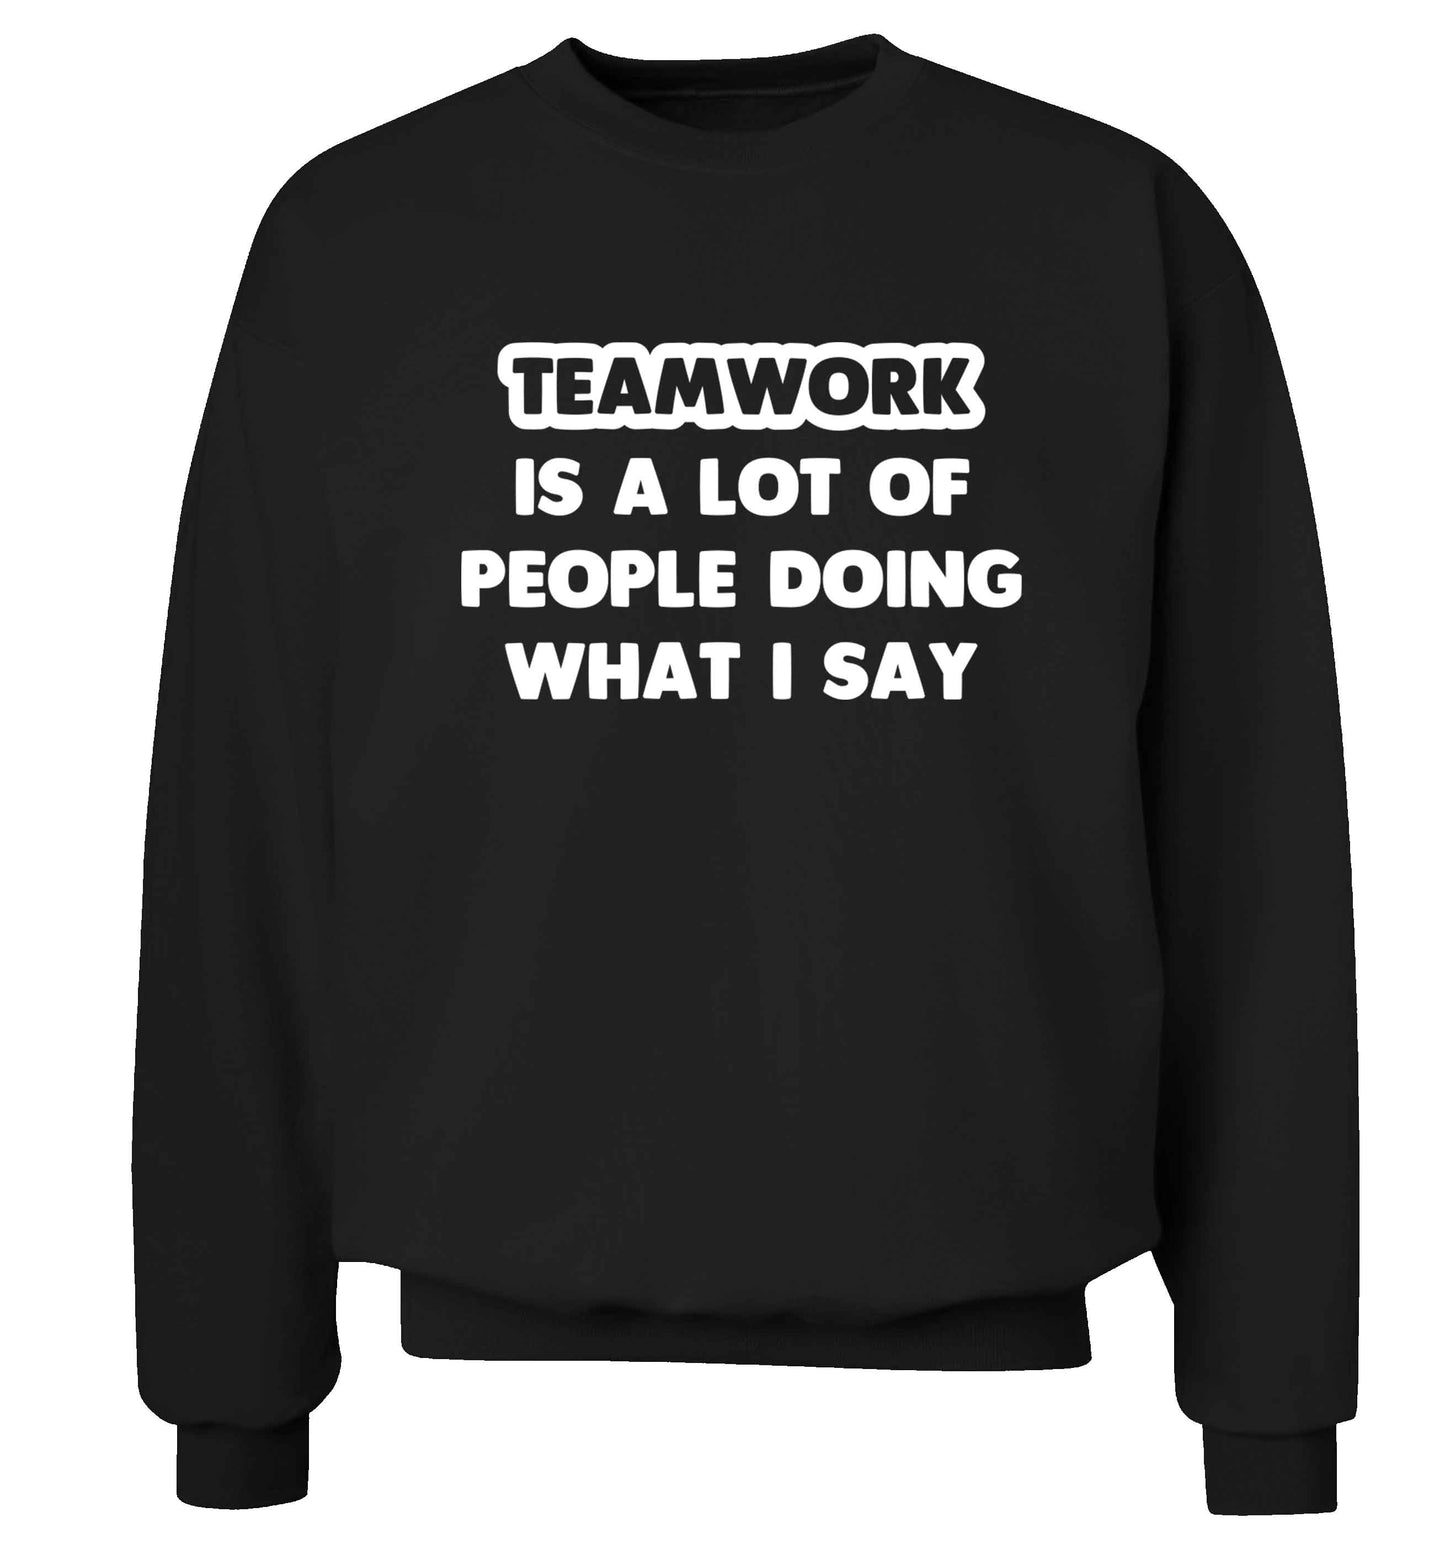 Teamwork is a lot of people doing what I say Adult's unisex black Sweater 2XL